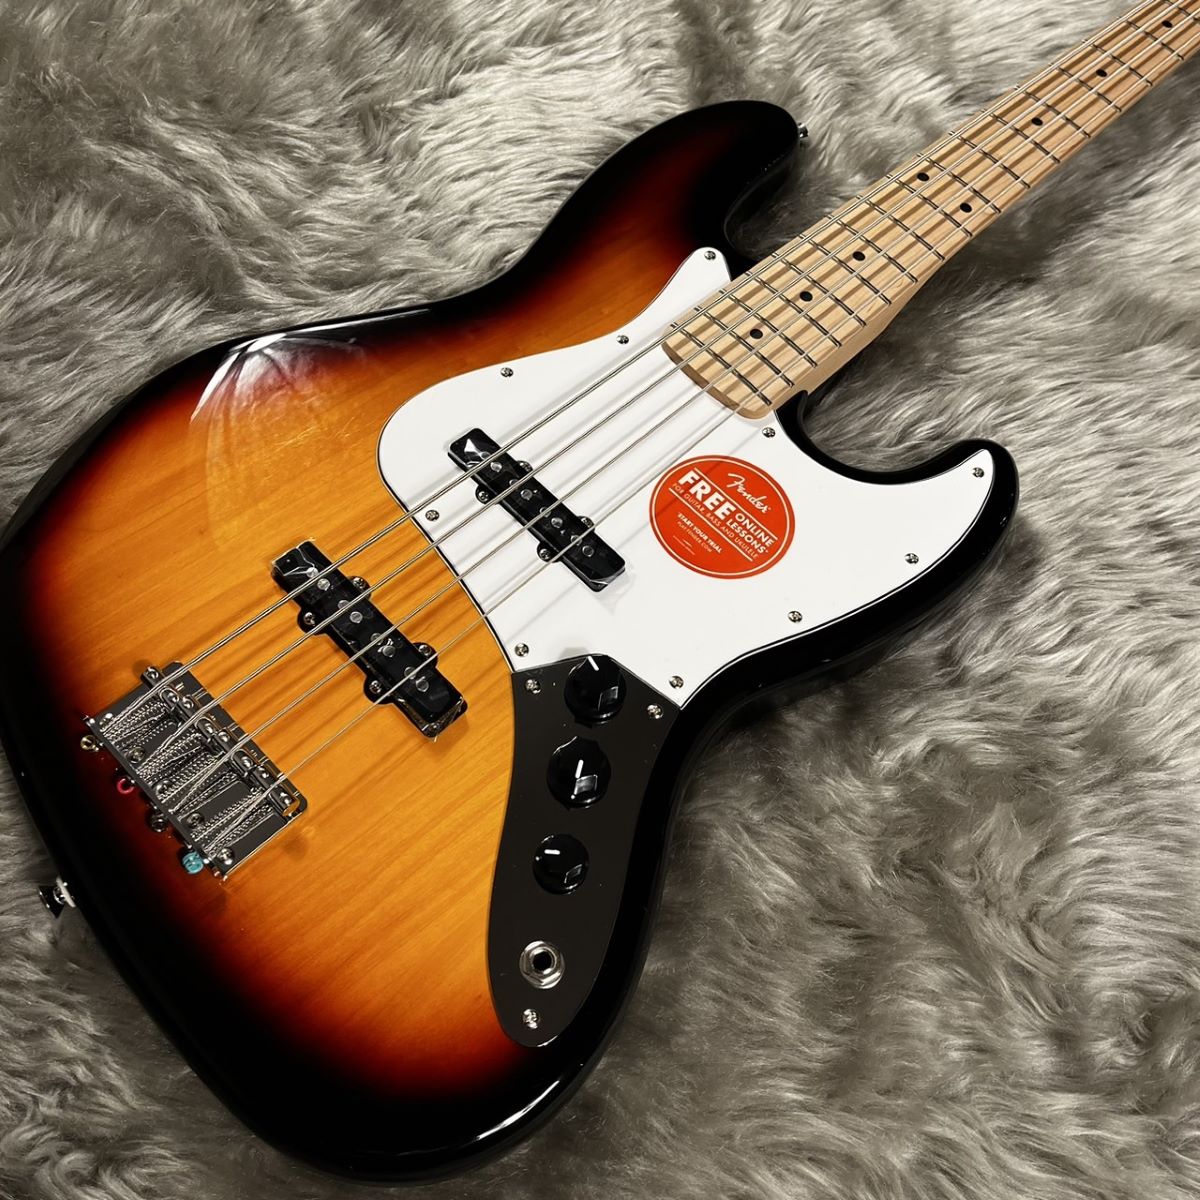 Squier by Fender Affinity Series Jazz Bass Maple Fingerboard White  Pickguard 3-Color Sunburst エレキベース ジャズベース スクワイヤー / スクワイア 【 ららぽーと堺店 】